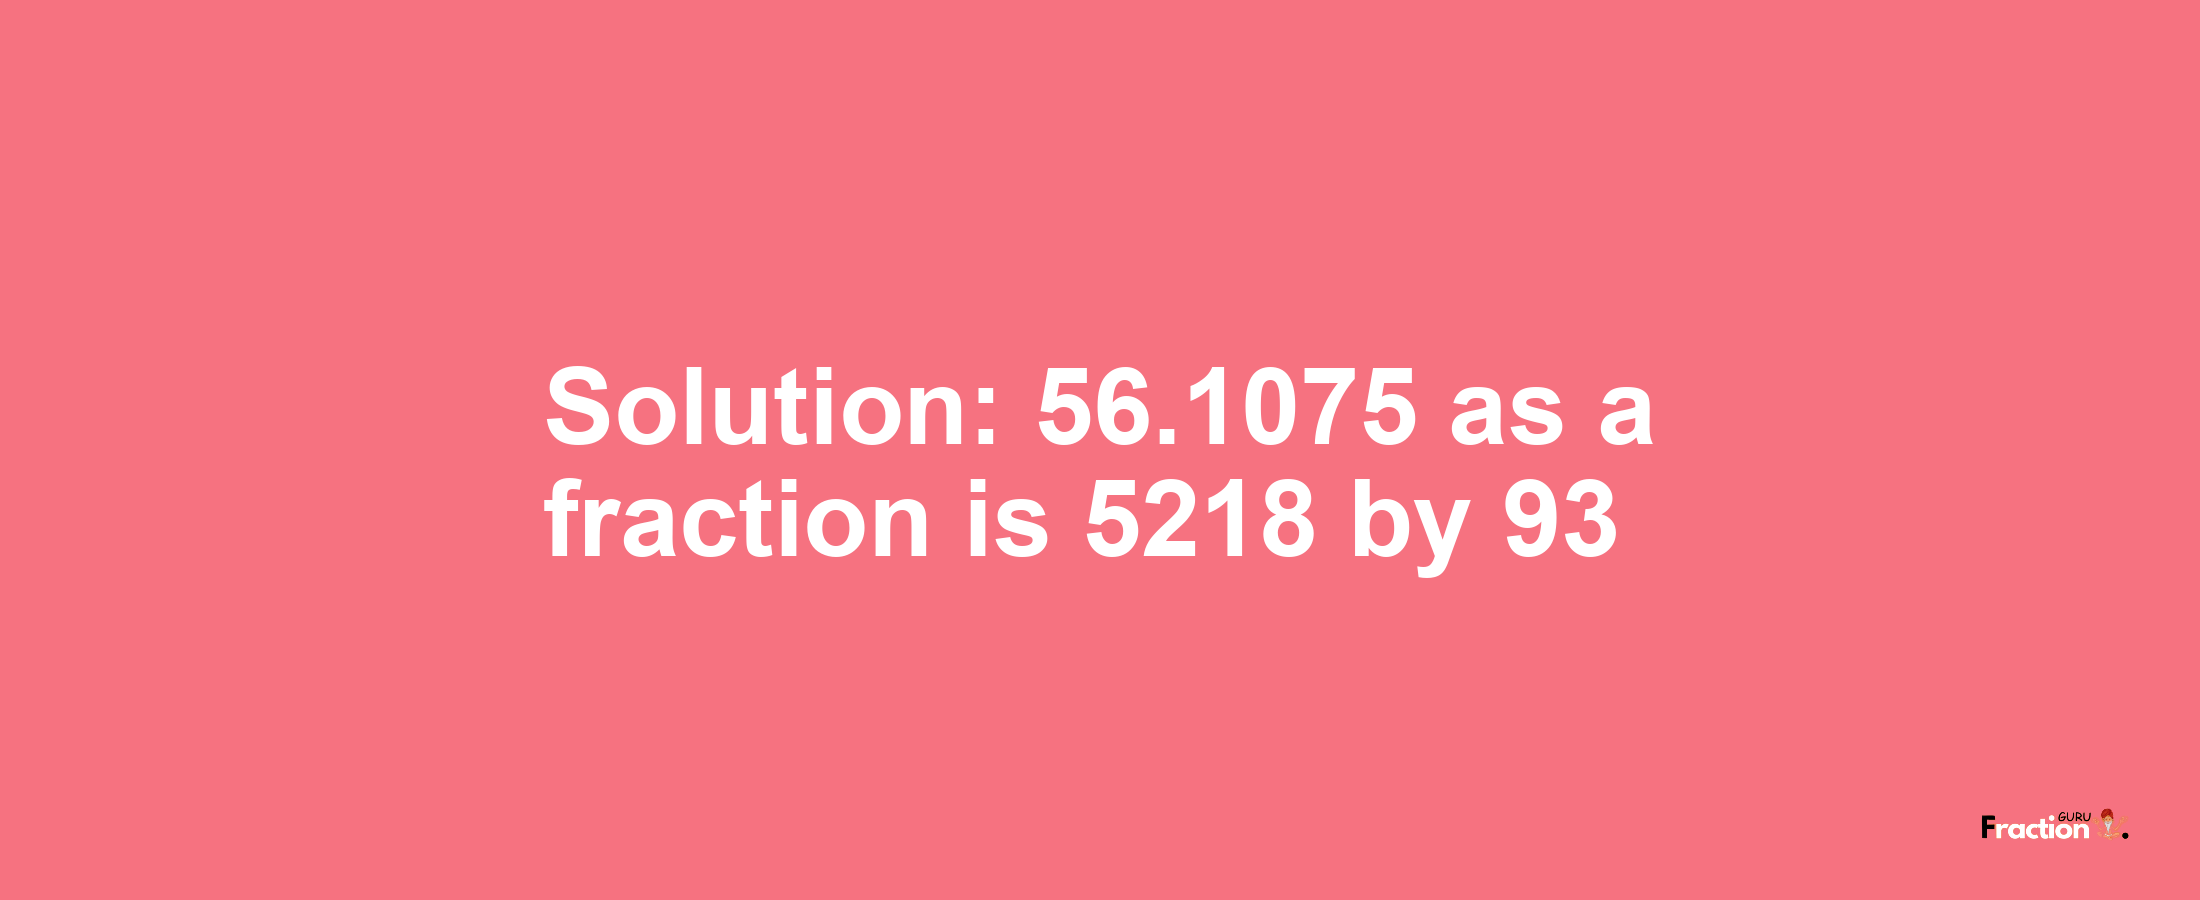 Solution:56.1075 as a fraction is 5218/93